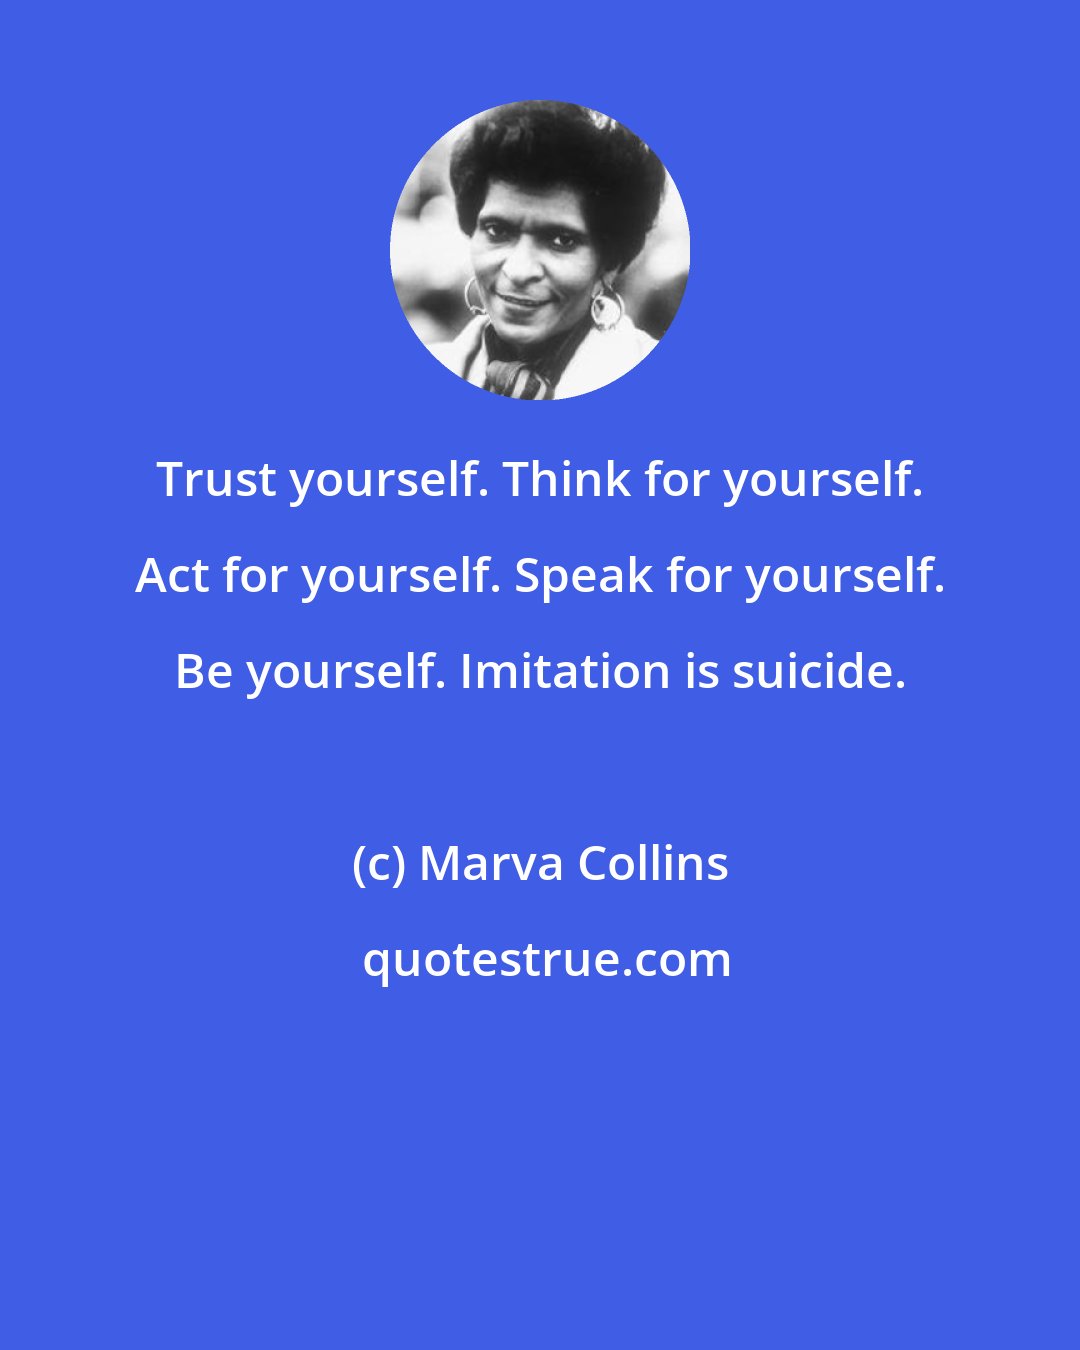 Marva Collins: Trust yourself. Think for yourself. Act for yourself. Speak for yourself. Be yourself. Imitation is suicide.